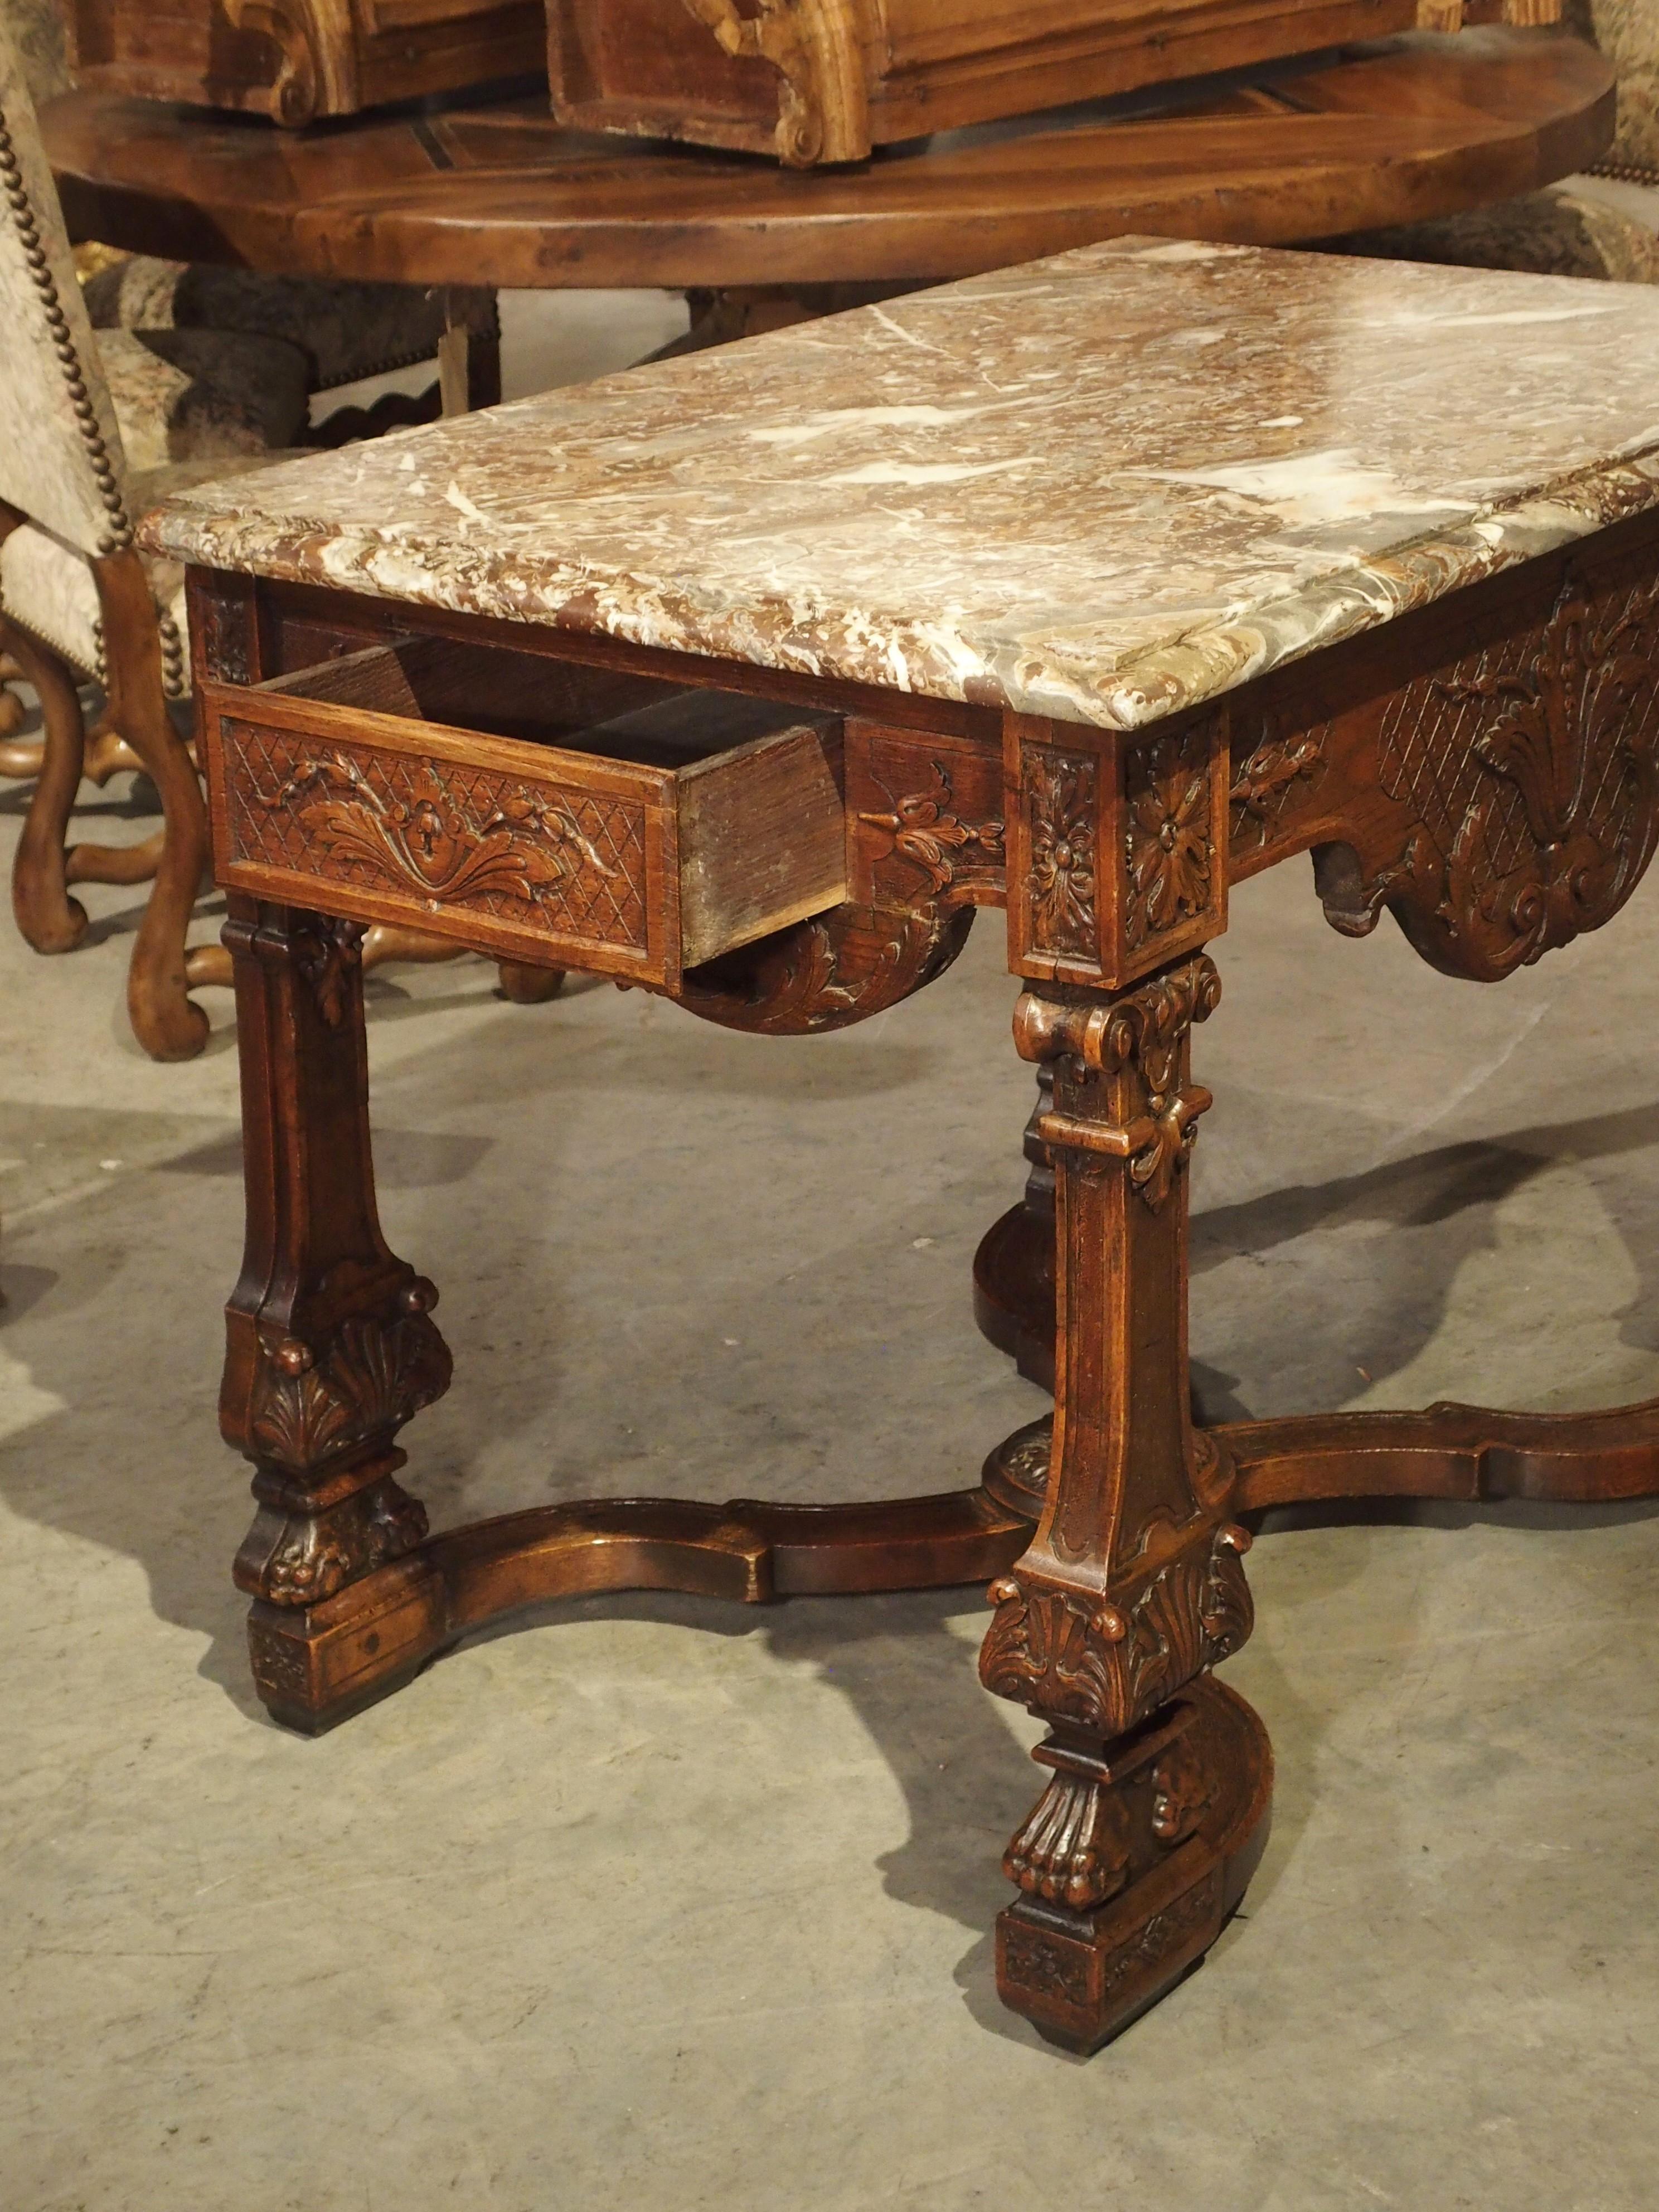 This amazingly detailed oak and marble table à gibier (game presentation table) hails from France, circa 1870, and was produced in the Louis XIV style. Although the table was created in the late 19th century, it incorporates elements that are even